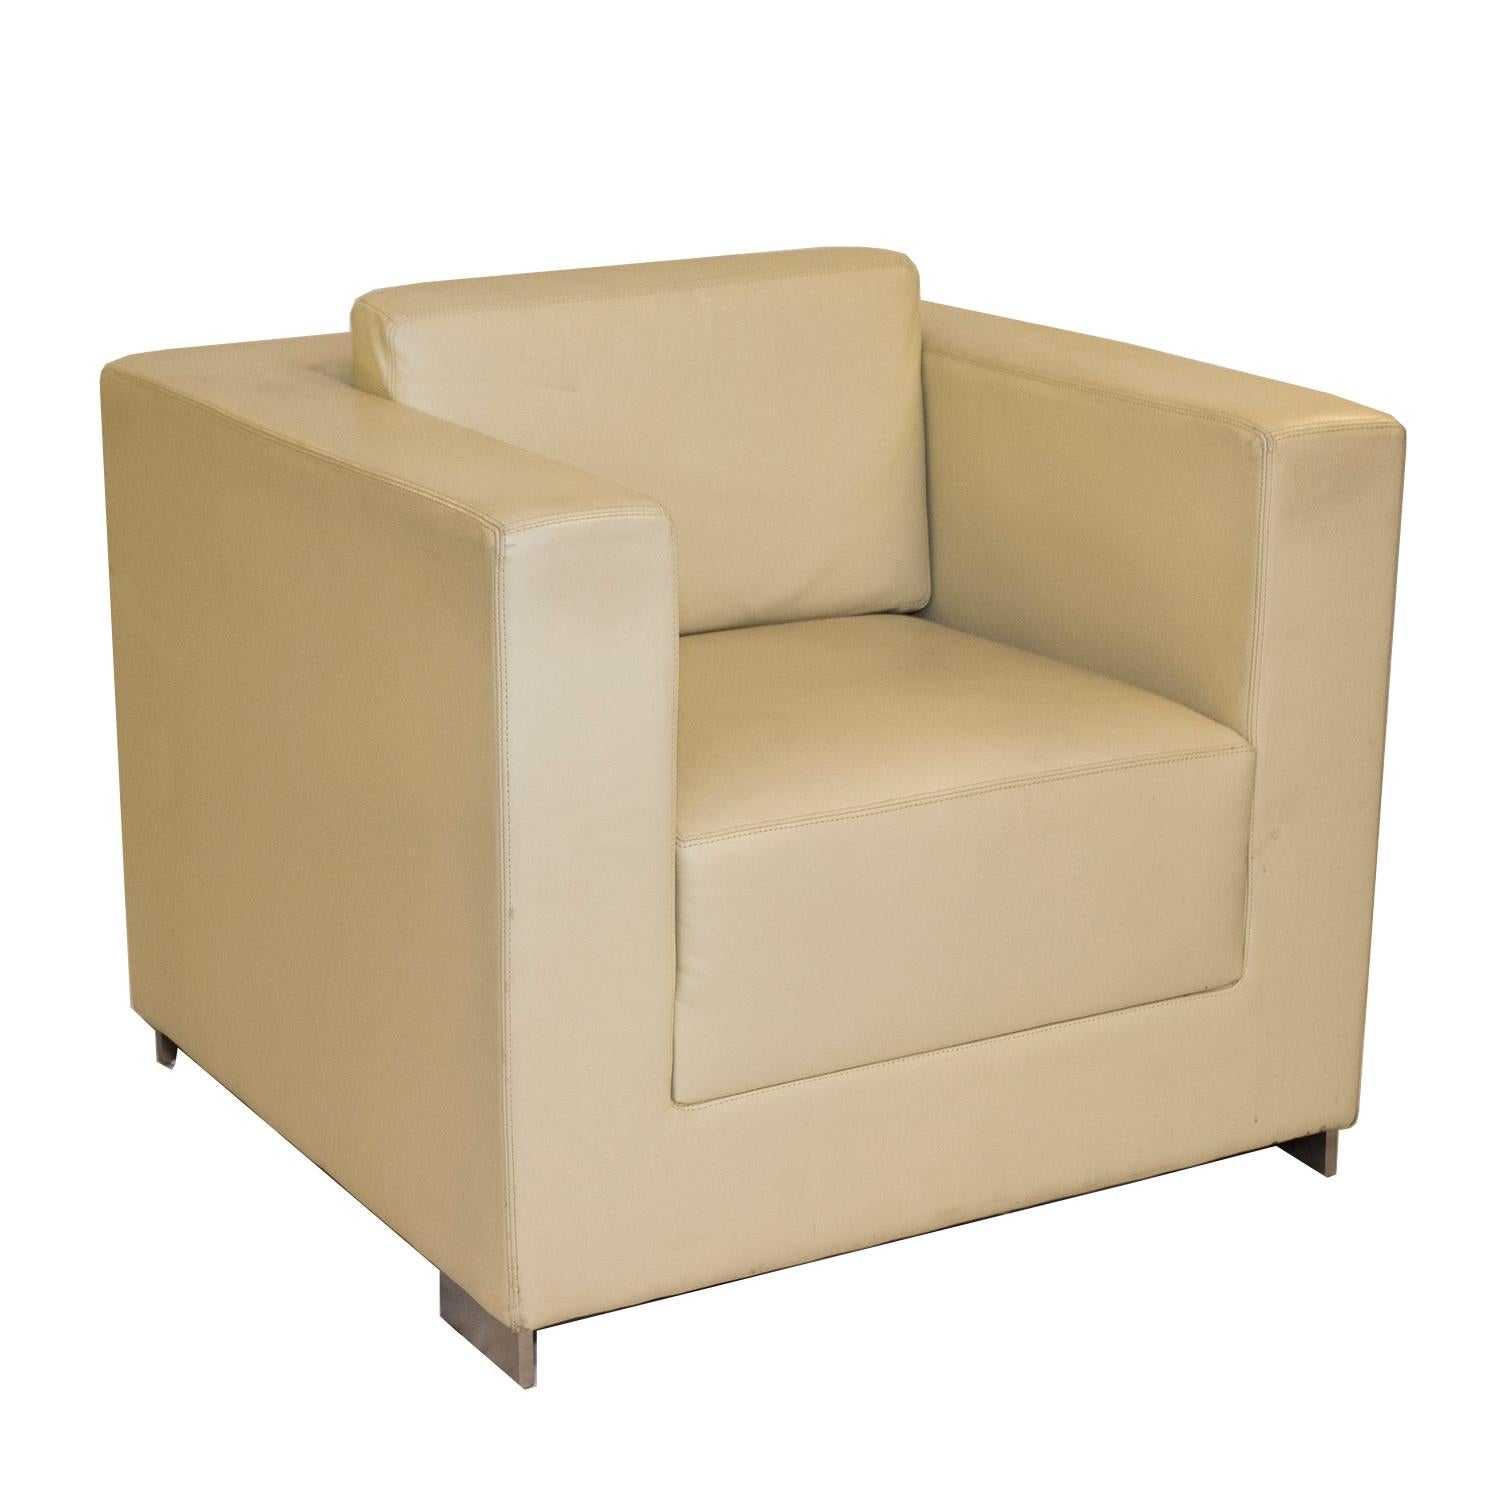 Art Deco Pair of Cube Lounge Chairs in Creme Leather by Bernhardt Furniture